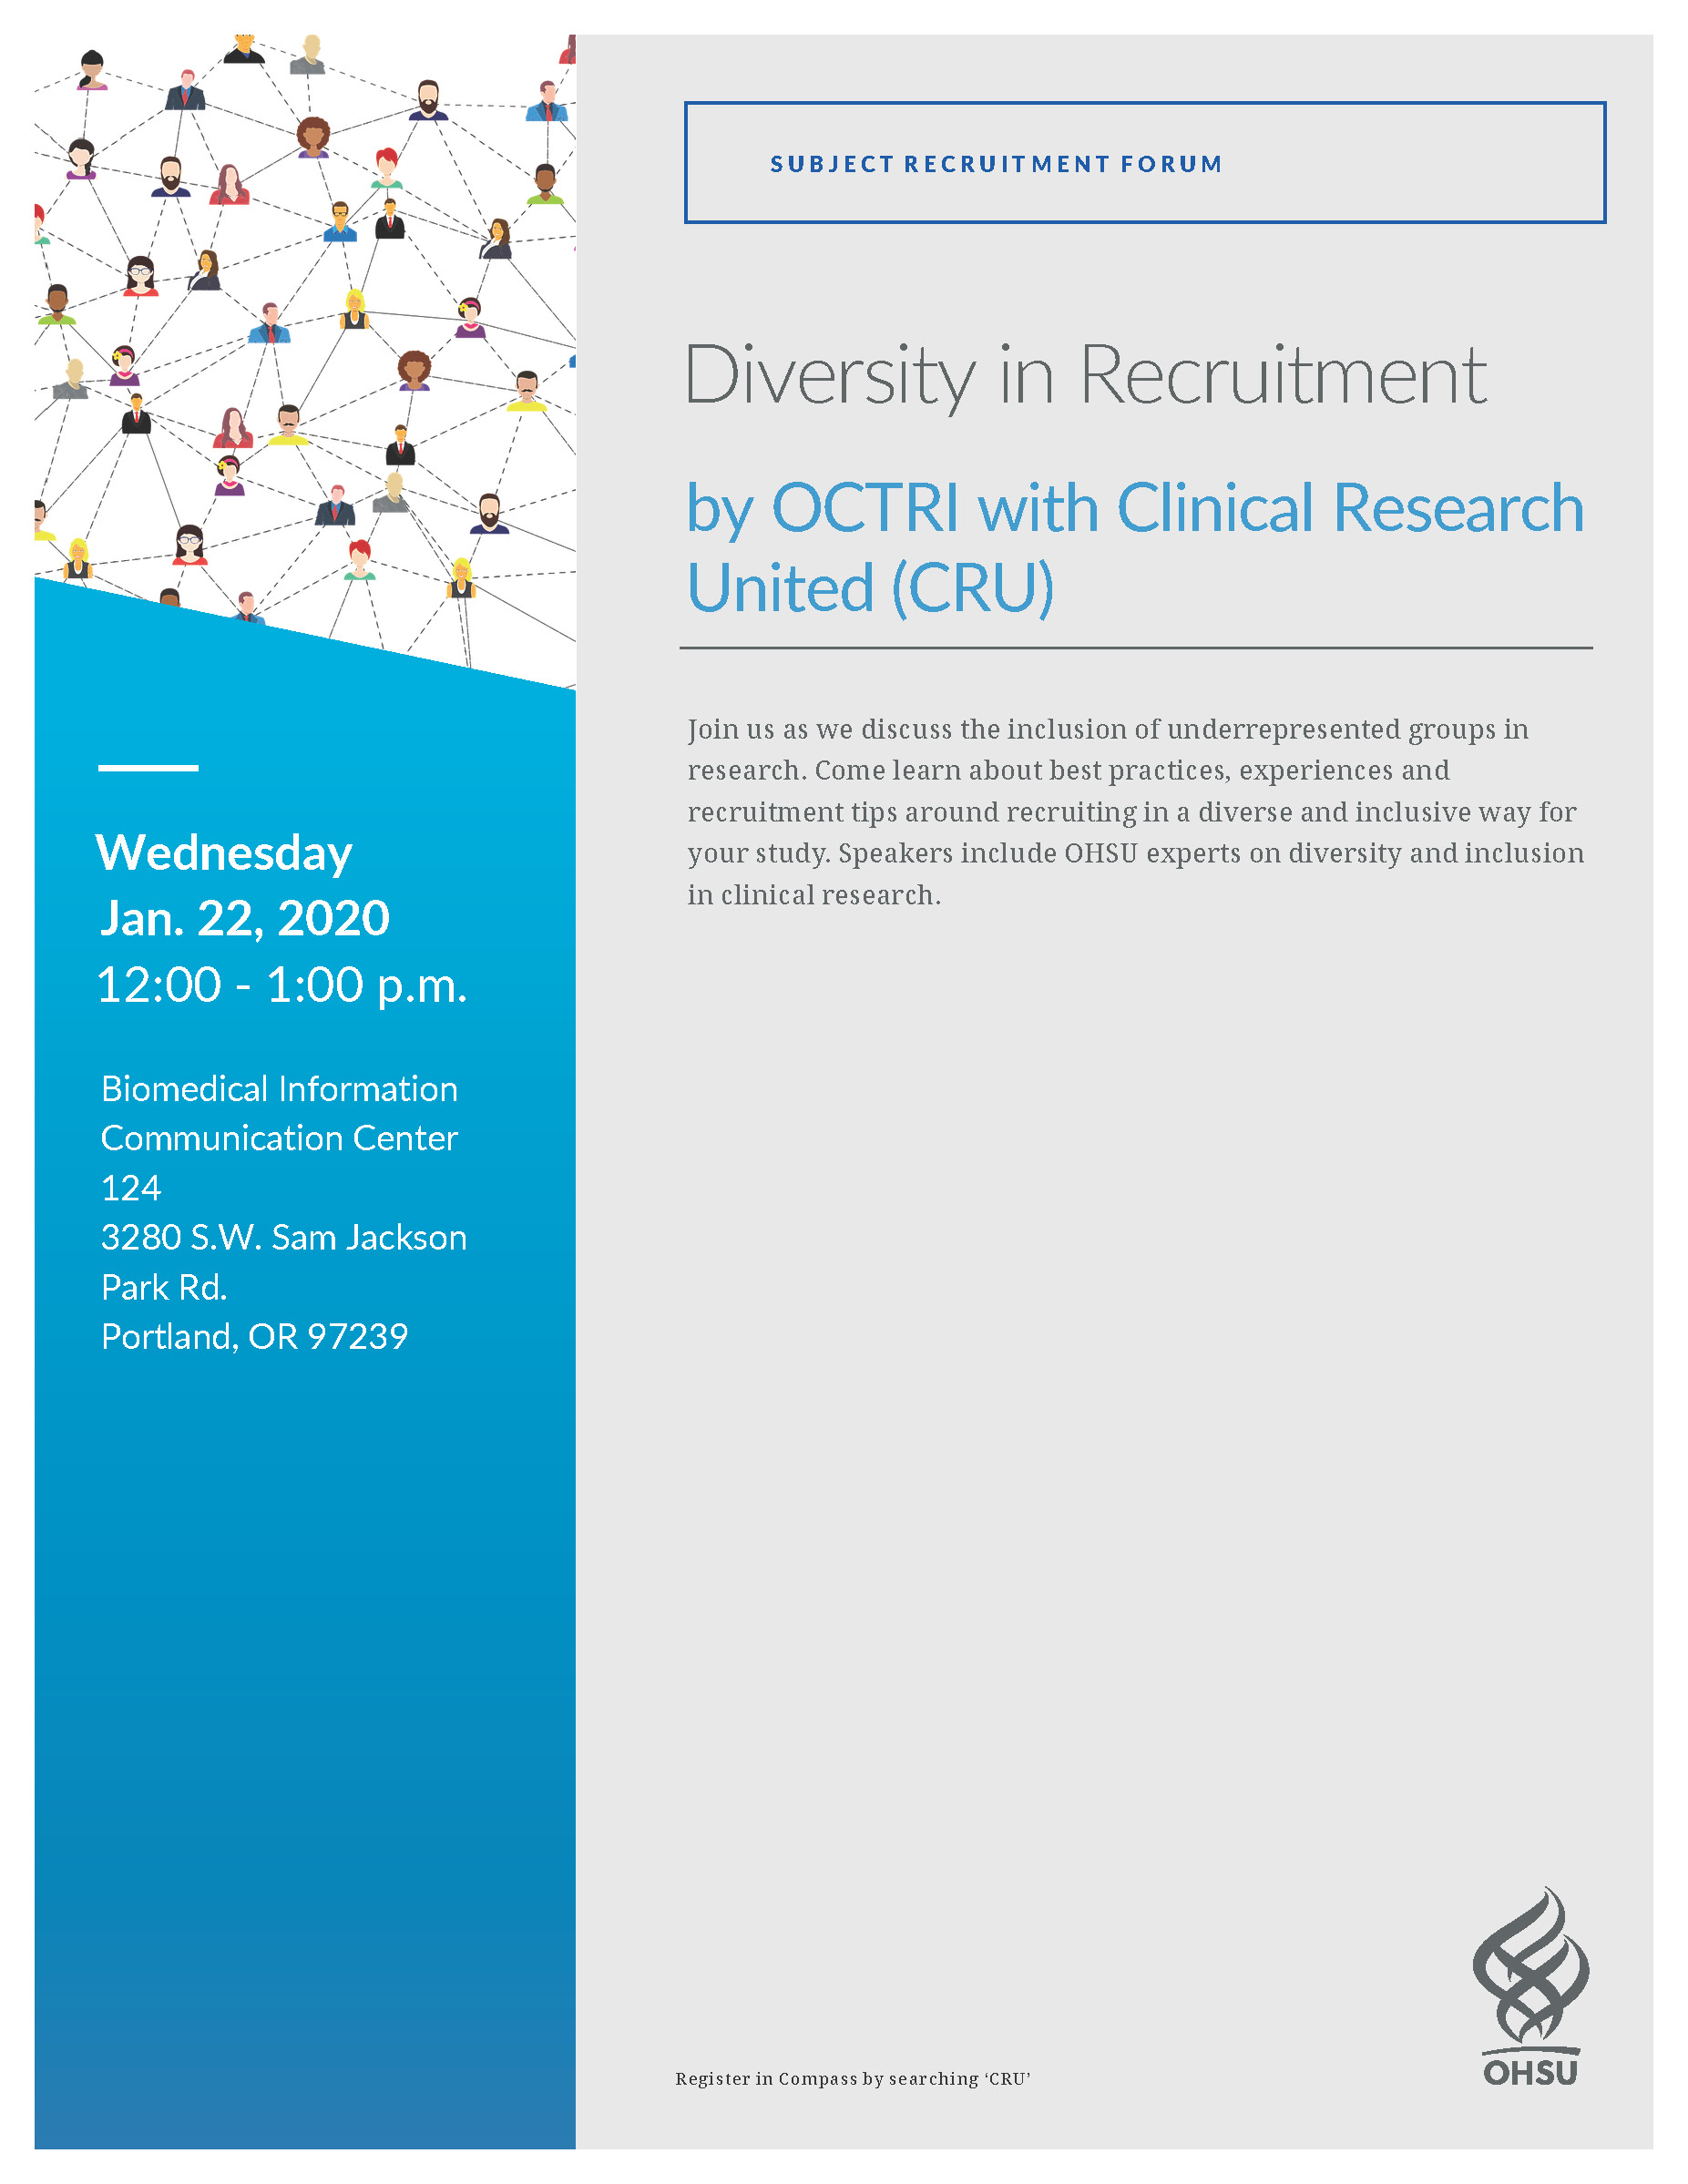 Flyer for OCTRI recruitment seminar with Clinical Research United (CRU).  All text is copied directly on to the web page for accessibility software purposes.